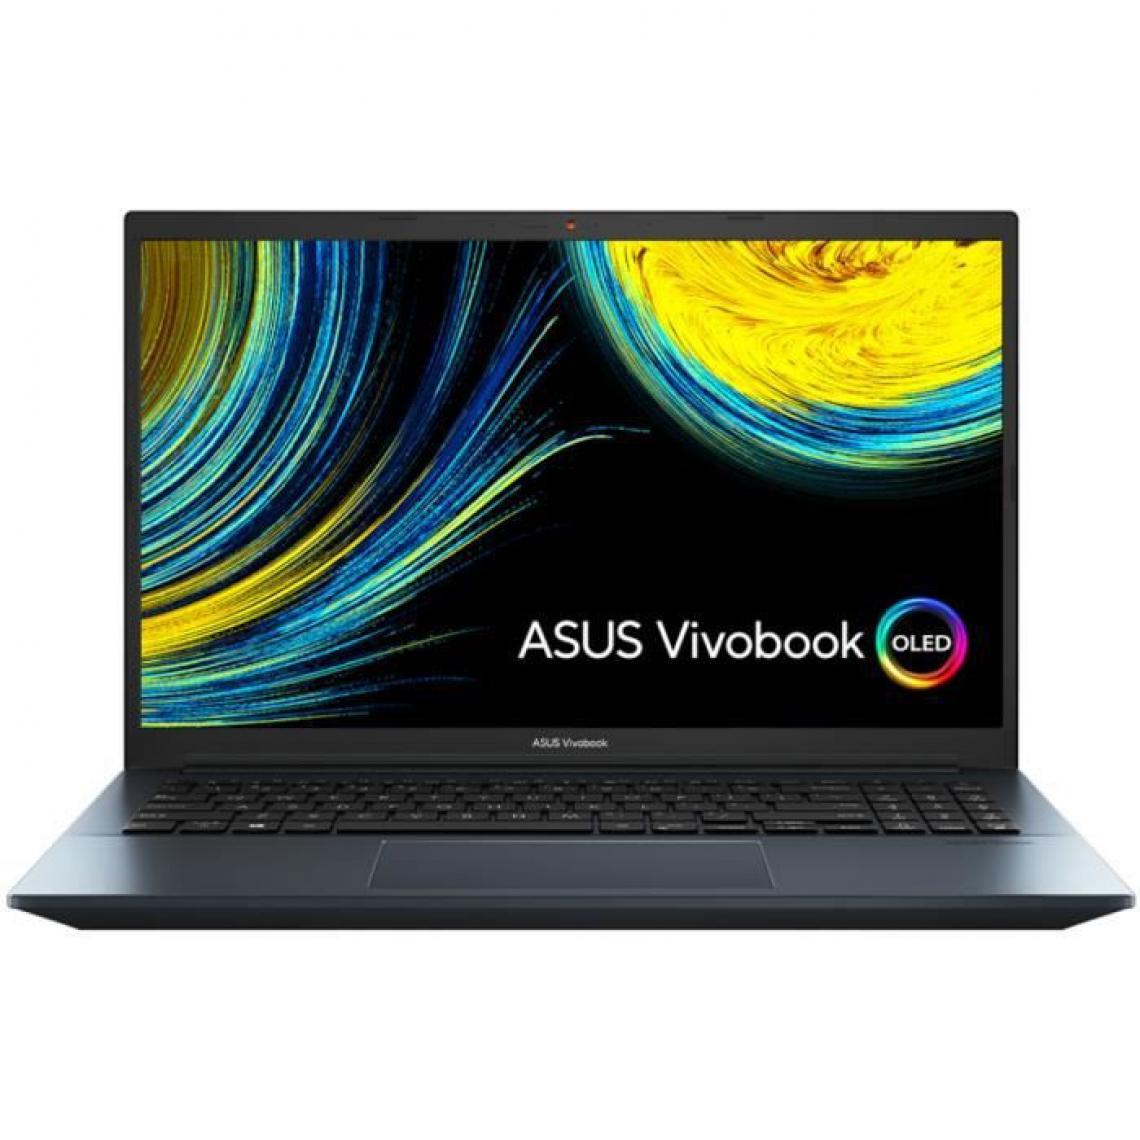 Asus - PC Ultraportable ASUS Vivobook Pro 15 OLED - S3500PH-L1082T - 15,6 FHD OLED - i5-11300H - RAM 16Go - SSD 512Go - GTX 1650 - W10 - PC Portable